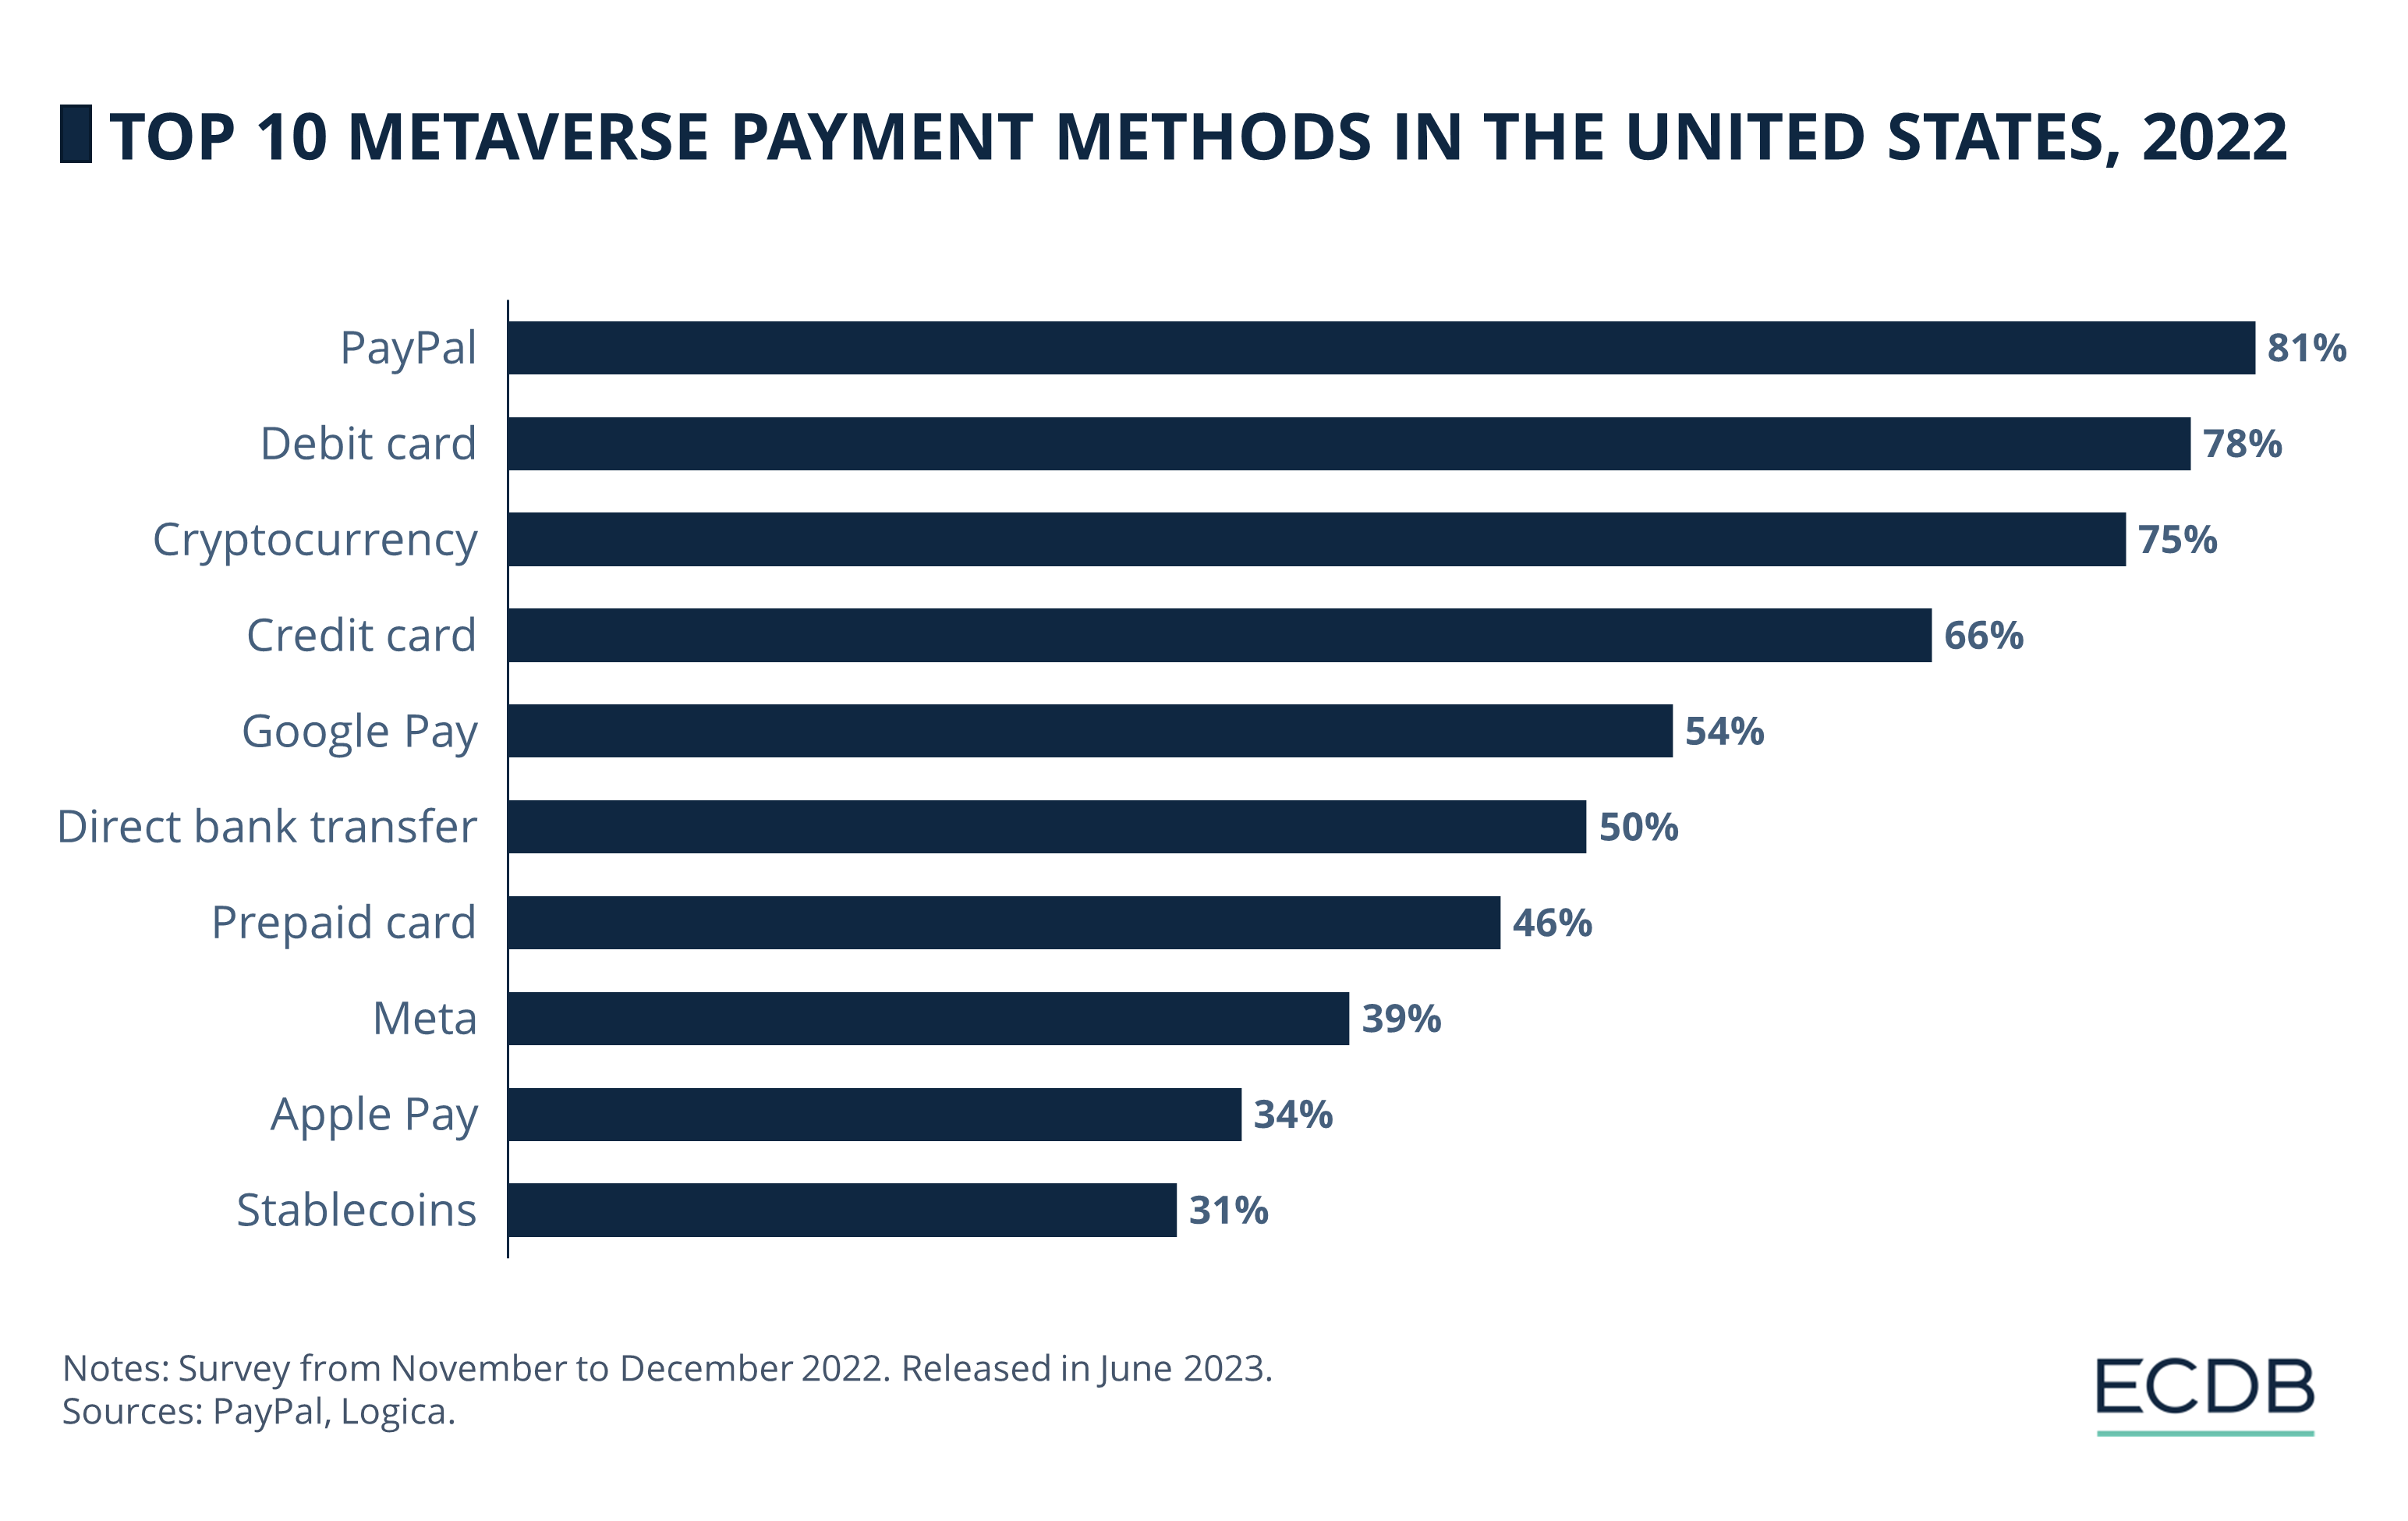 Top 10 Metaverse Payment Methods in the United States, 2022